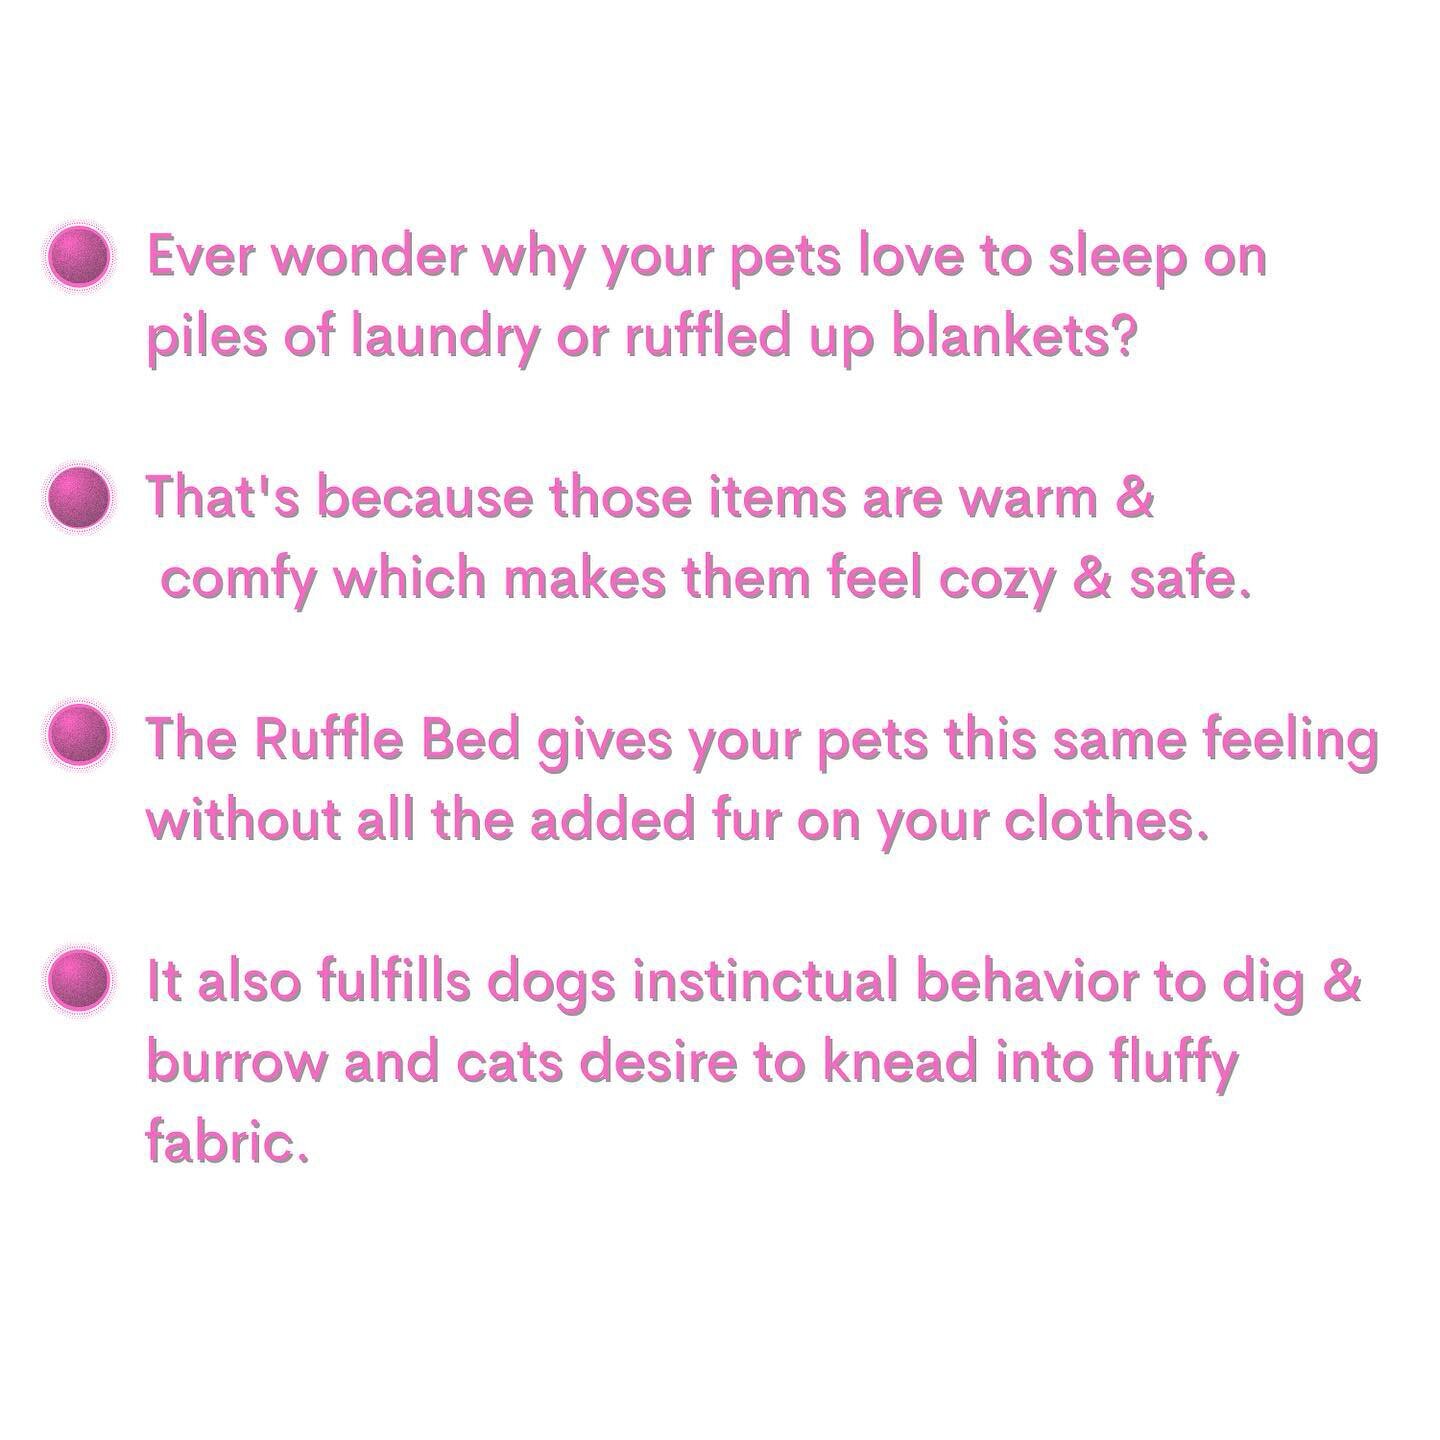 Ruffle Bed⁣
⁣
🧺Ever wonder why your pets love to sleep on piles of laundry or ruffled up blankets?

💫That&rsquo;s because those items are warm &amp; comfy which makes them feel cozy &amp; safe. 

👚The Ruffle Bed gives your pets this same feeling w